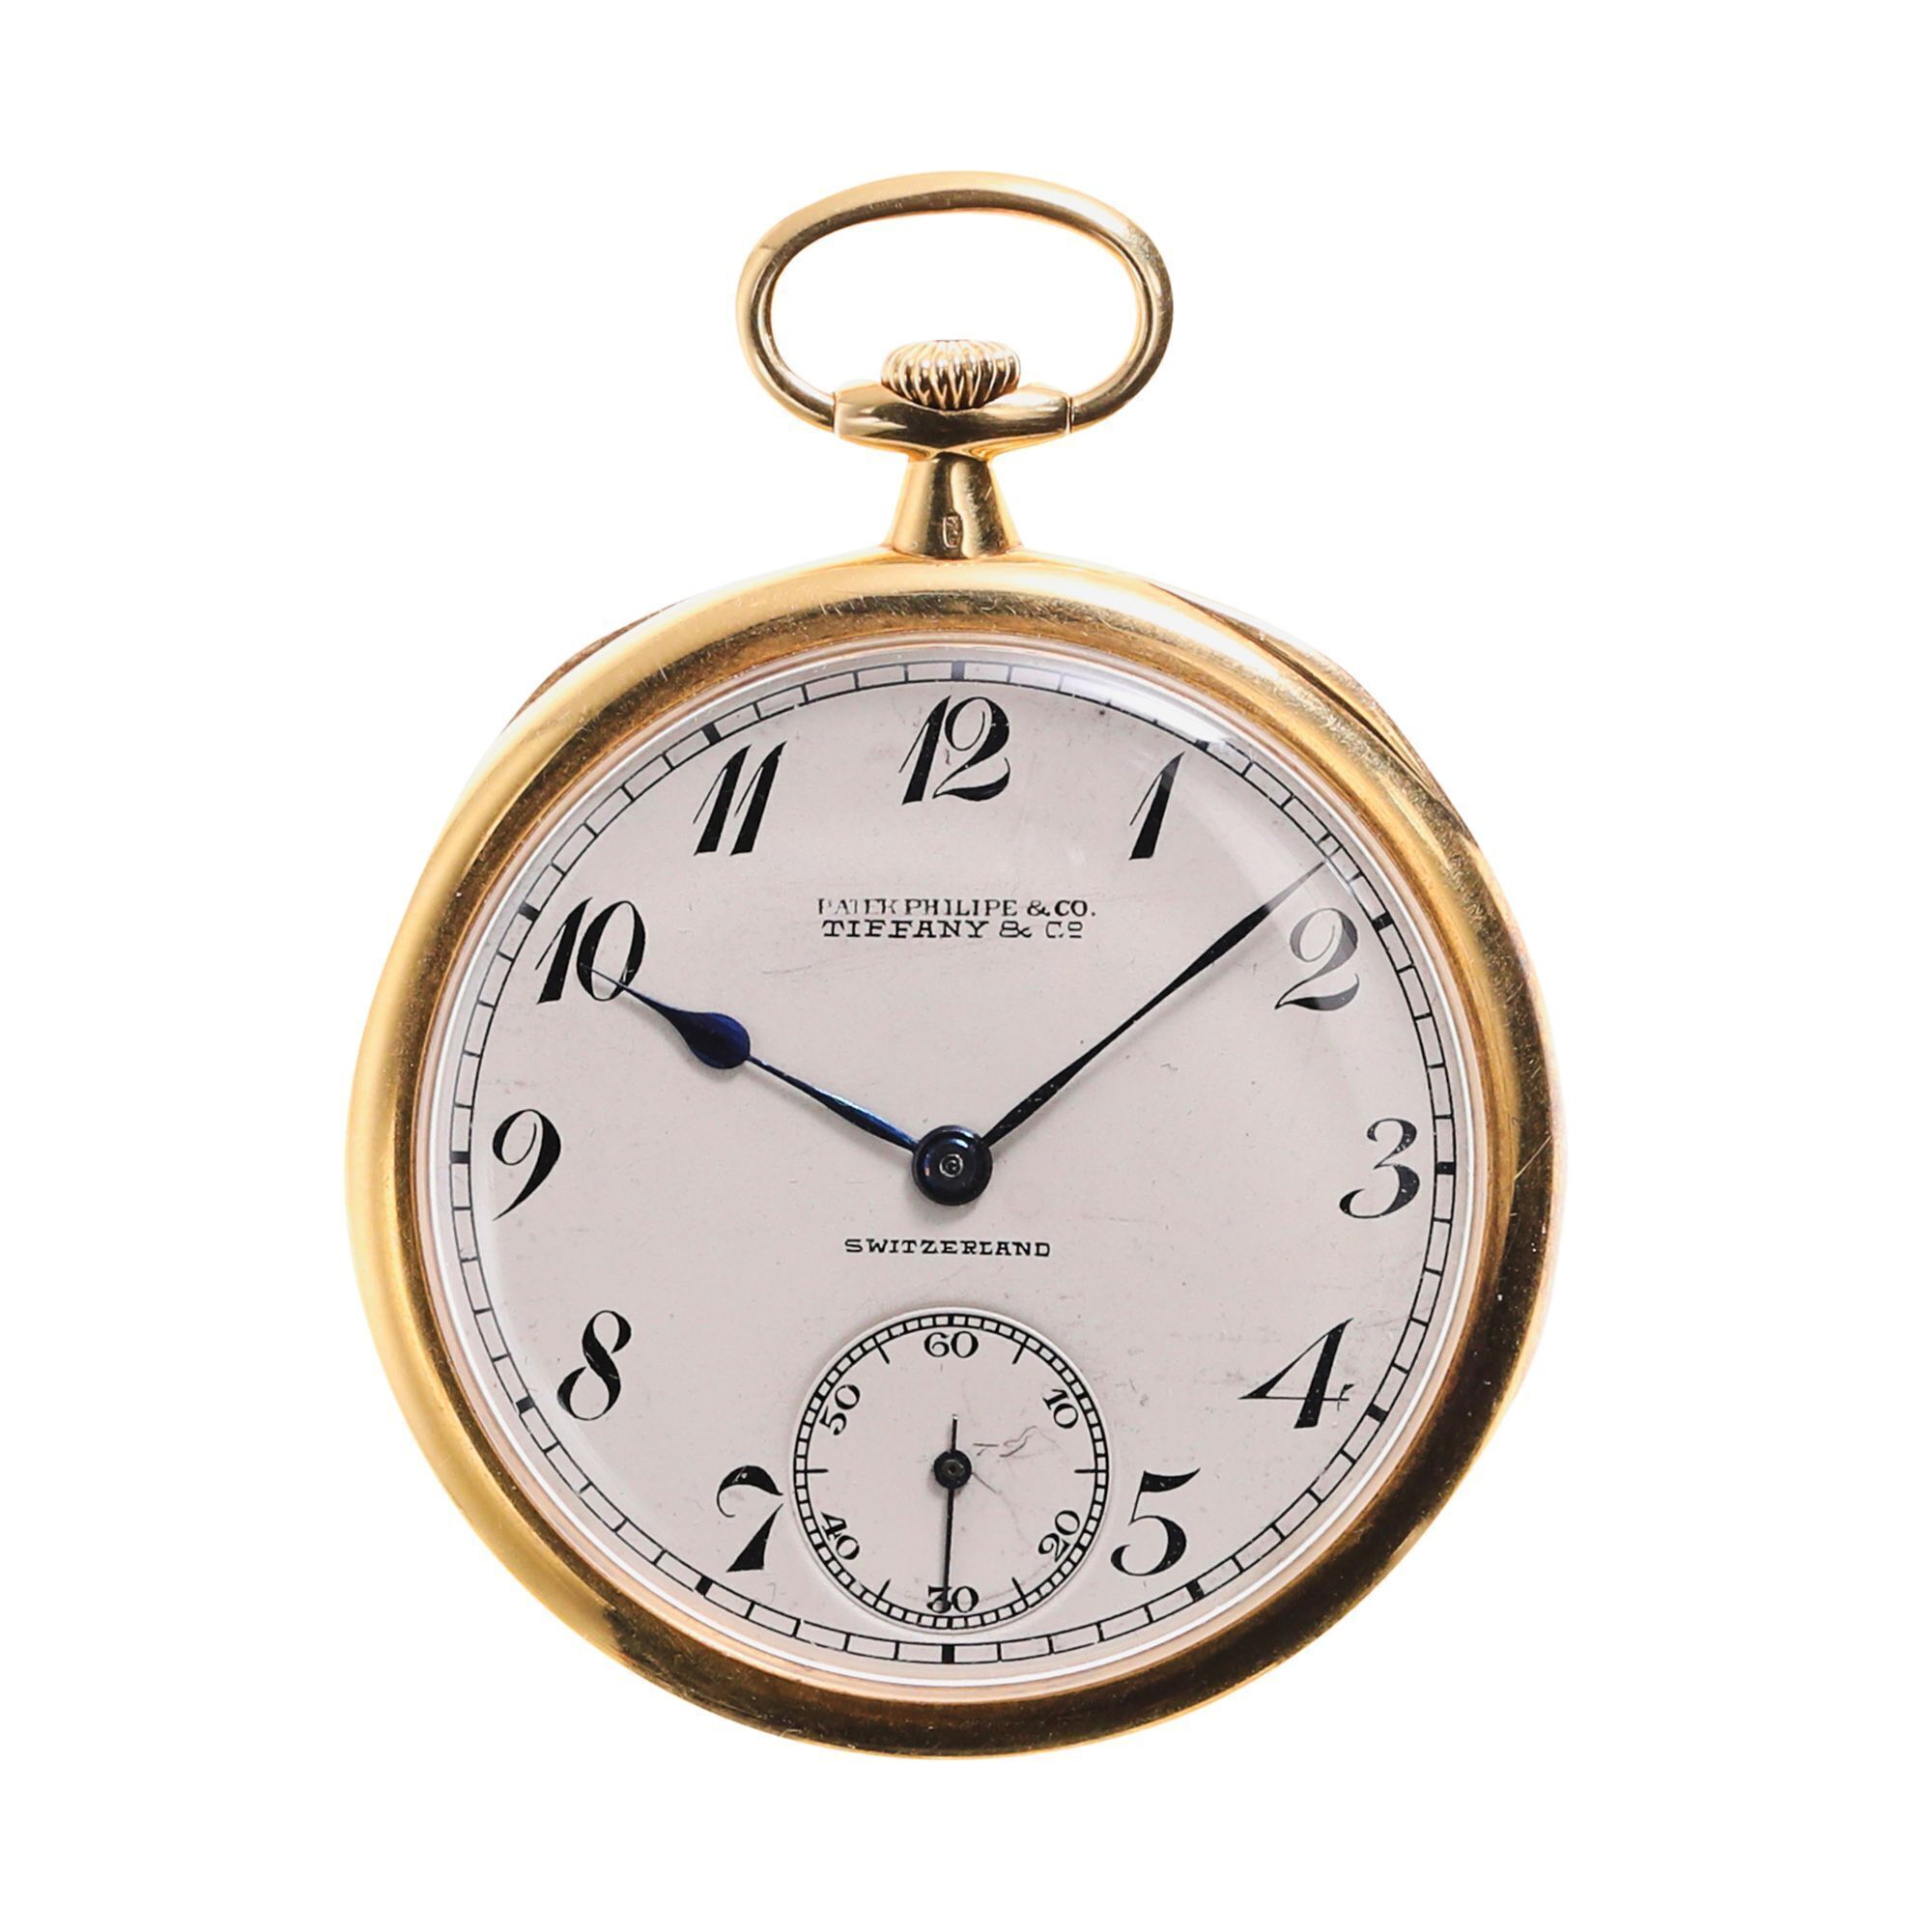 Patek Philippe for Tiffany & Co. Extra Grade 18K Yellow Gold Pocket Watch